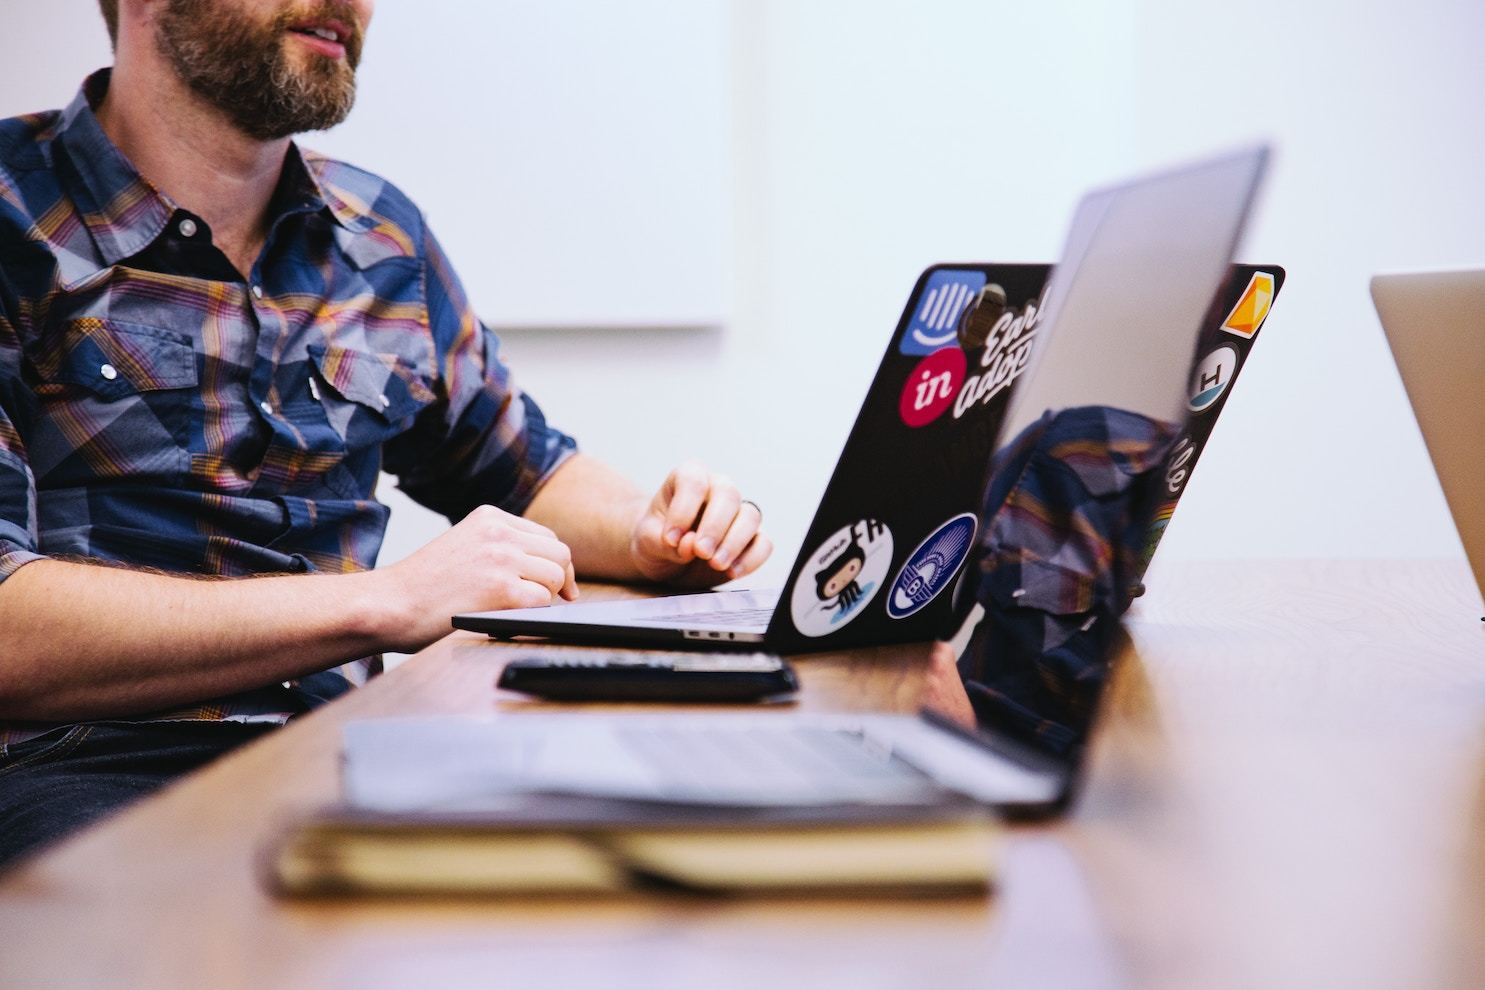 A bearded man in a flannel shirt with a sticker-covered laptop